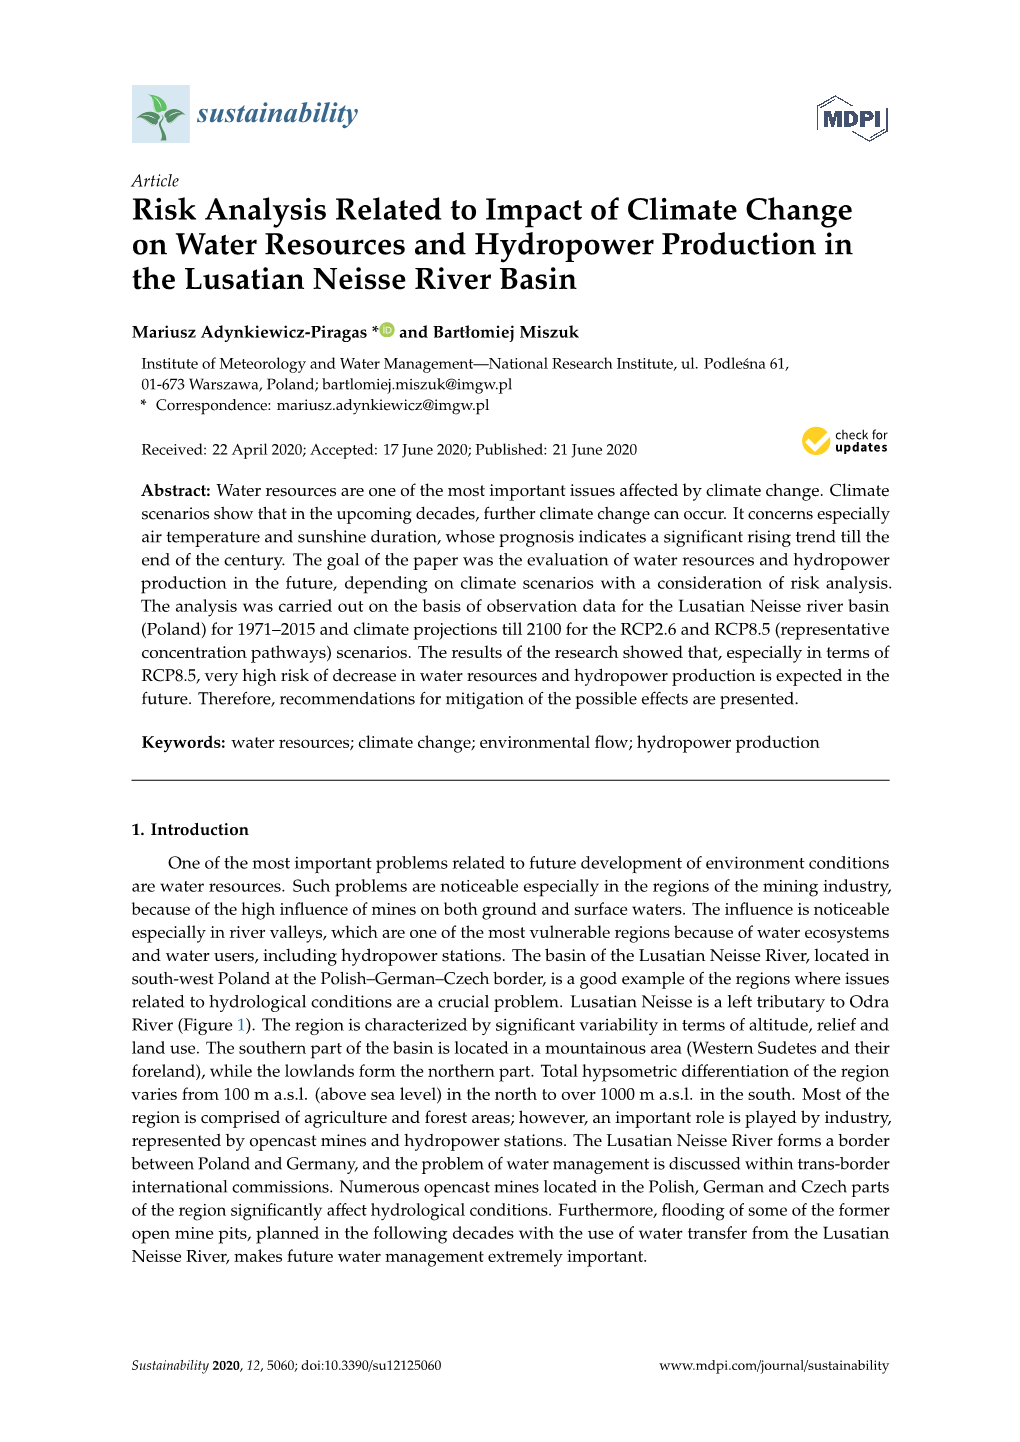 Risk Analysis Related to Impact of Climate Change on Water Resources and Hydropower Production in the Lusatian Neisse River Basin